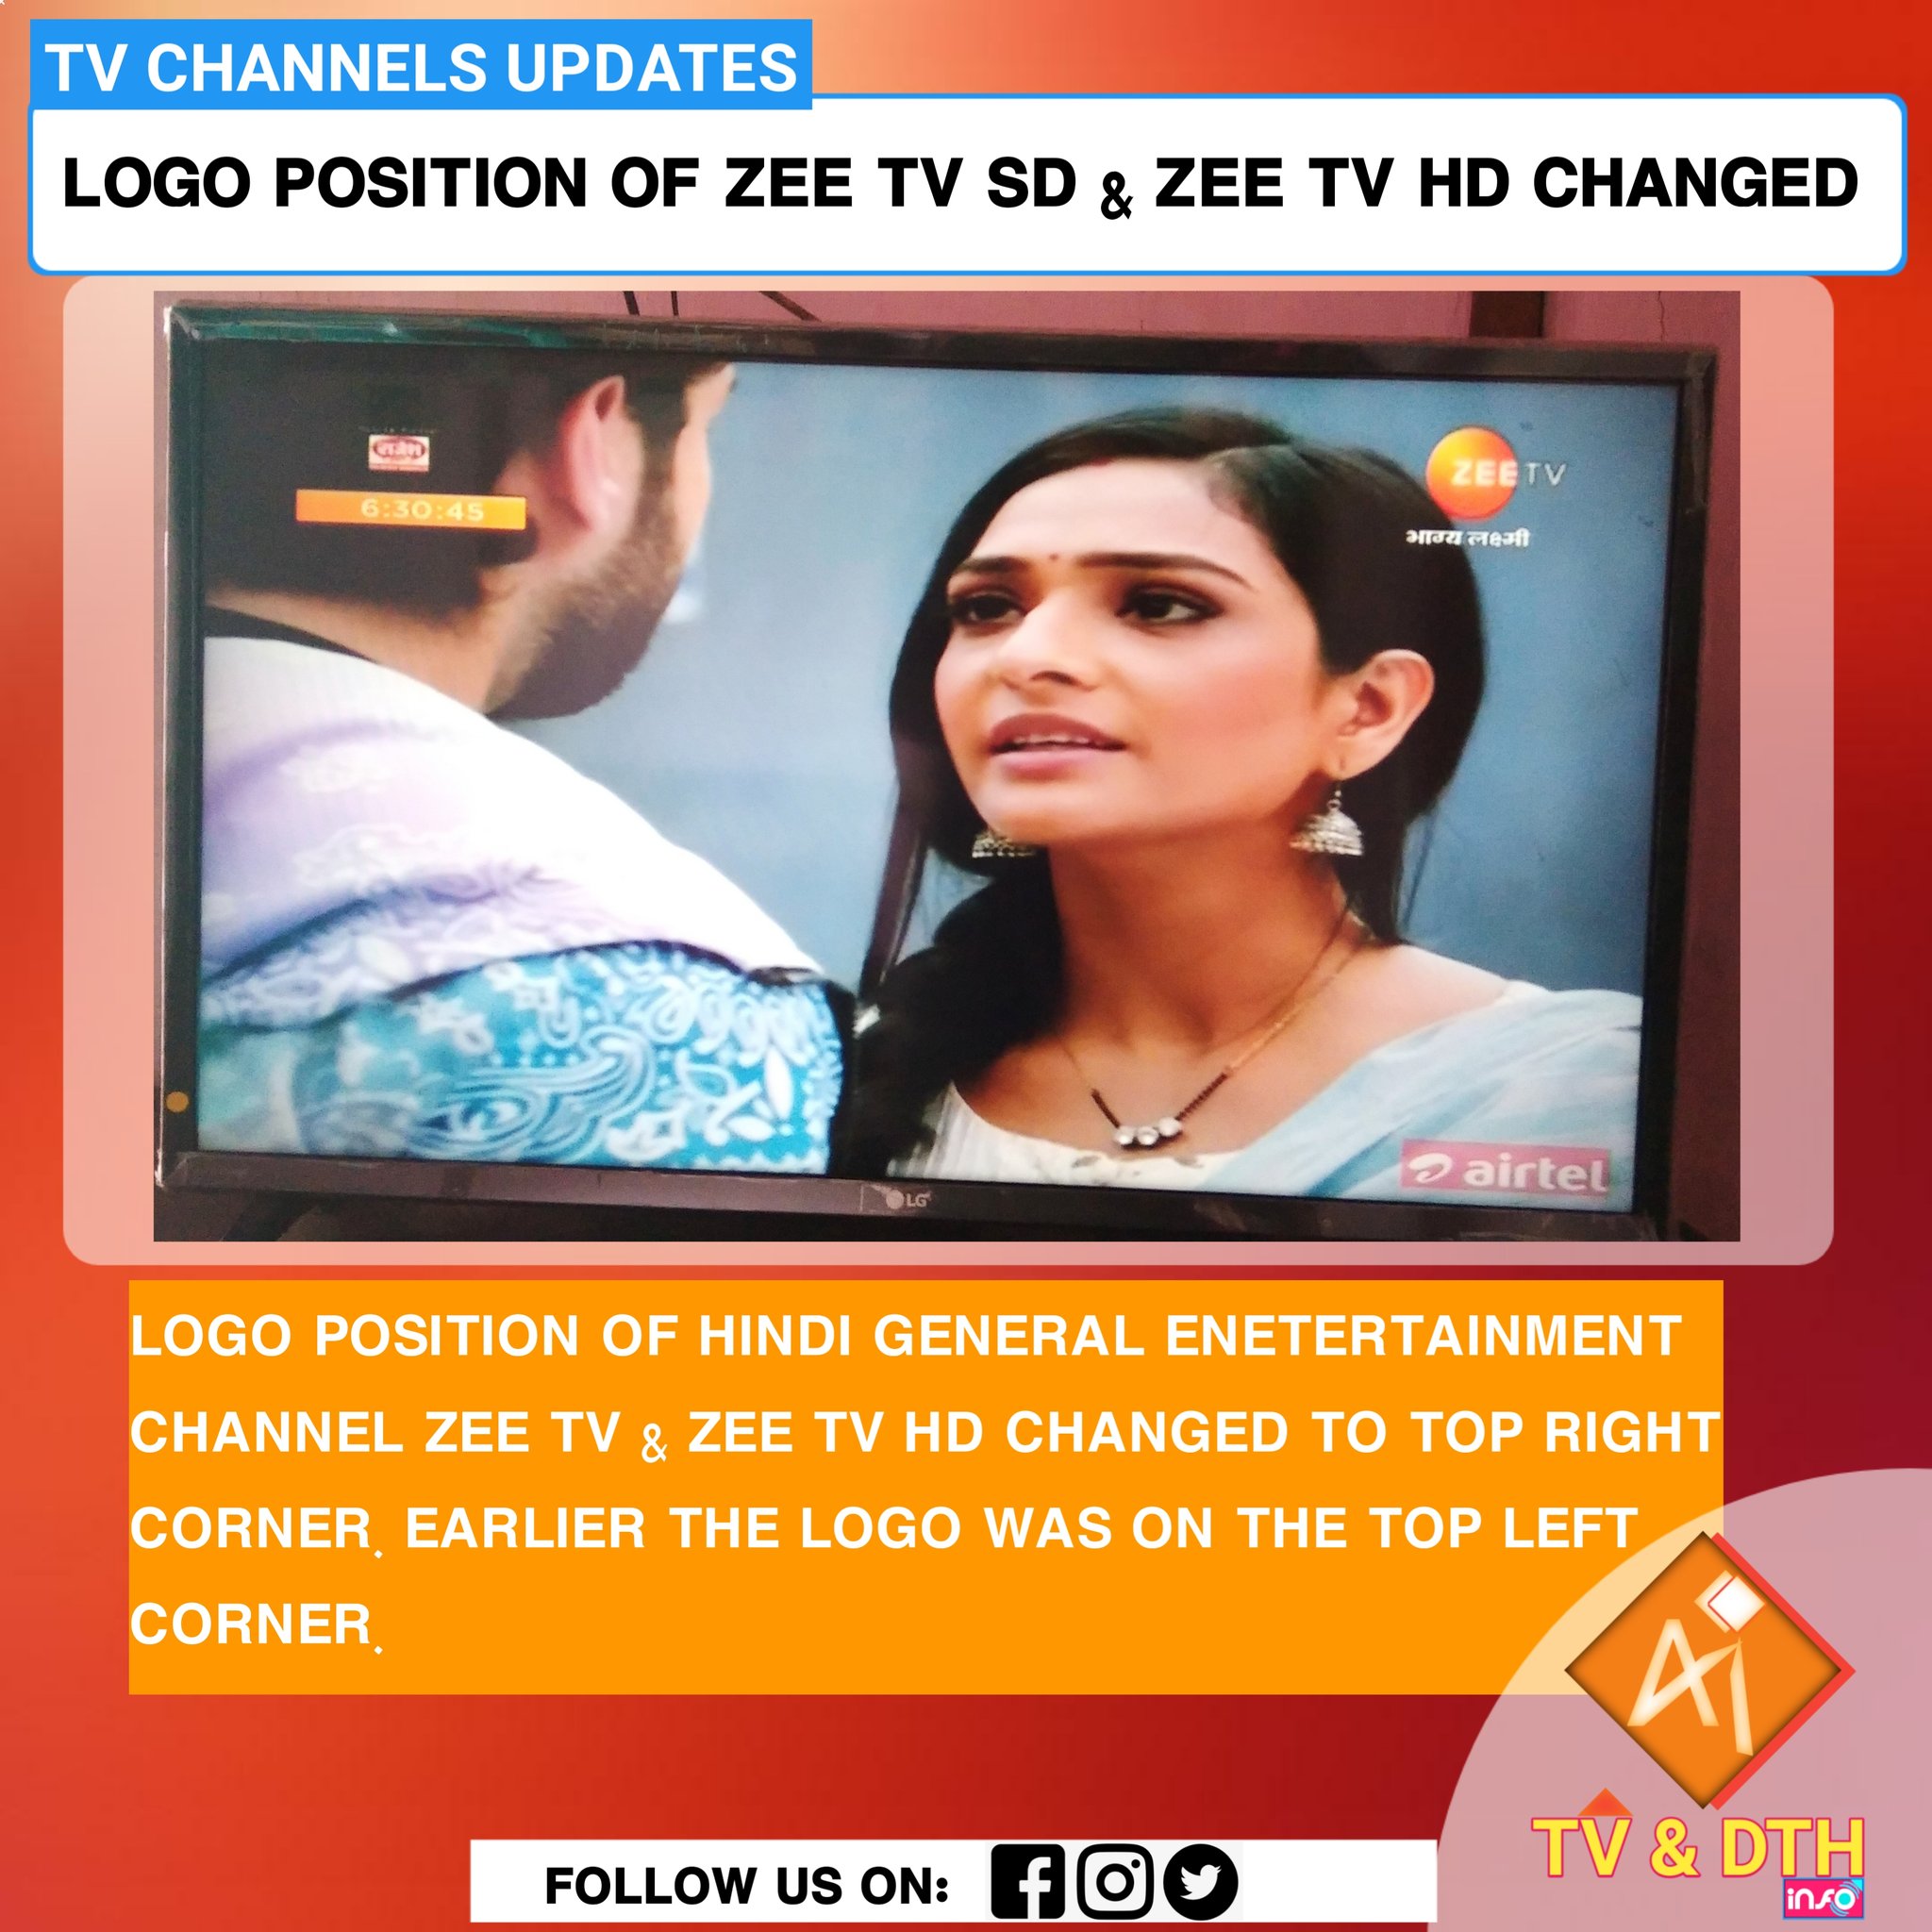 Good News - zee tv to change it's logo to orange white color theme |  DreamDTH Forums - Television Discussion Community